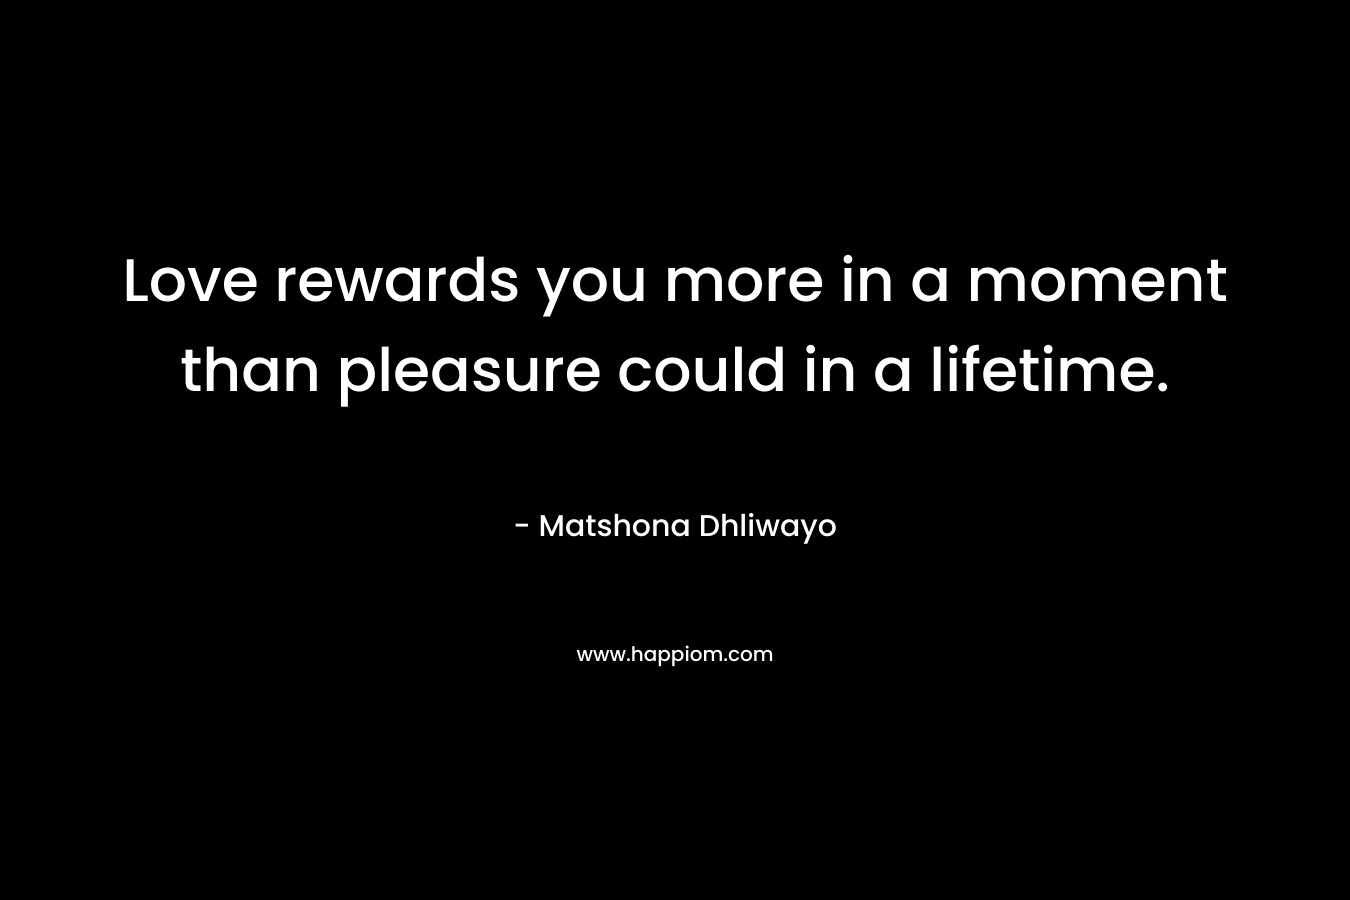 Love rewards you more in a moment than pleasure could in a lifetime.